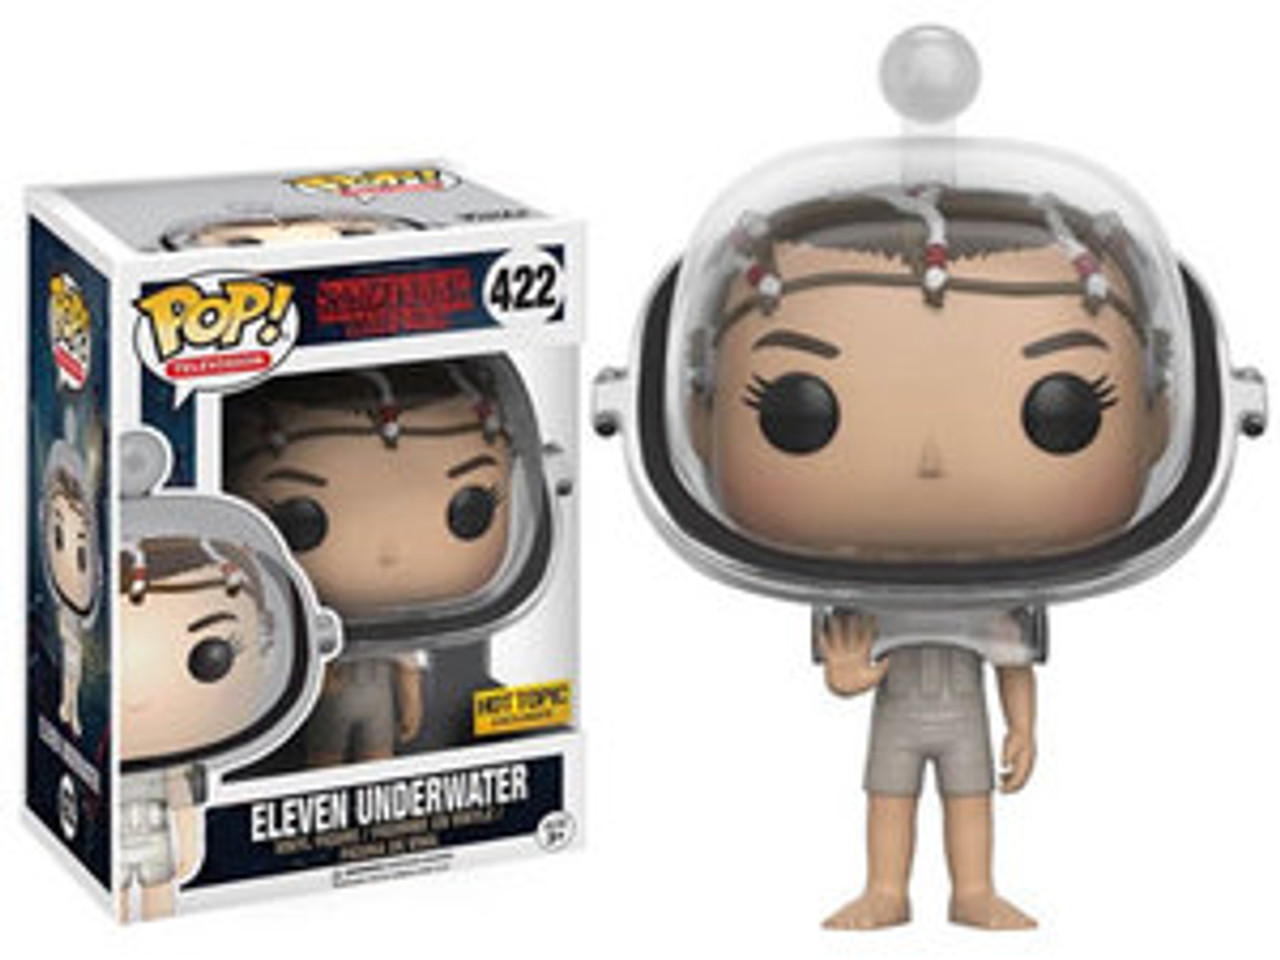 Eleven Underwater 422 Stranger Things Hot Topic Exclusive Funko